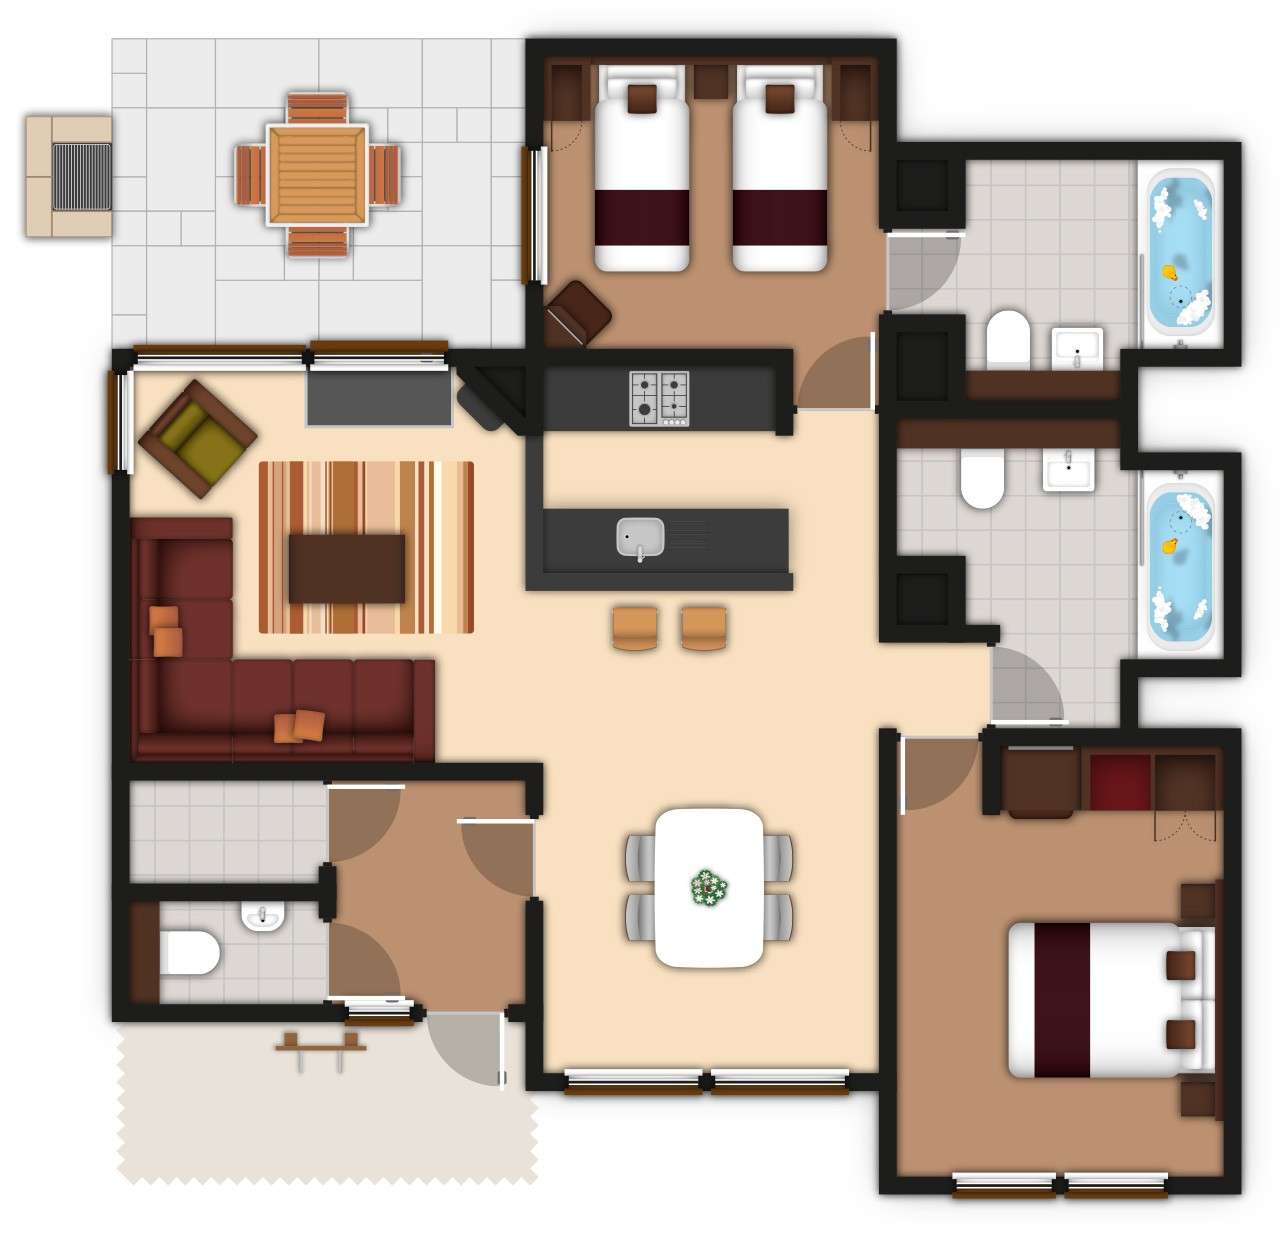 A detailed floor plan illustration of a two bedroom Executive Lodge. If you require further assistance viewing the floor plan or need further information please contact Guest Services.